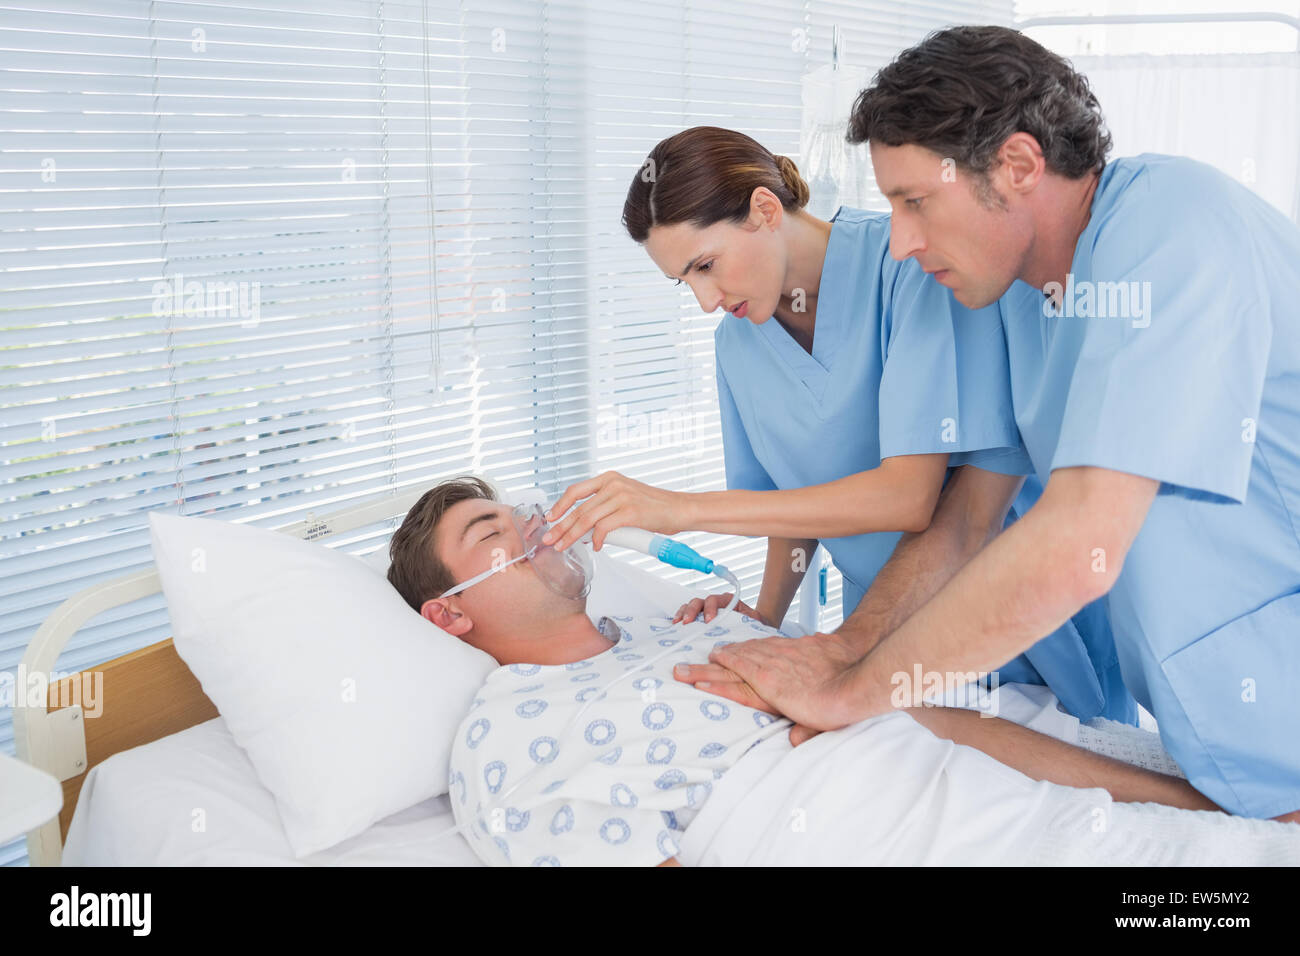 Worried doctors doing heart massage and holding oxygen mask Stock Photo